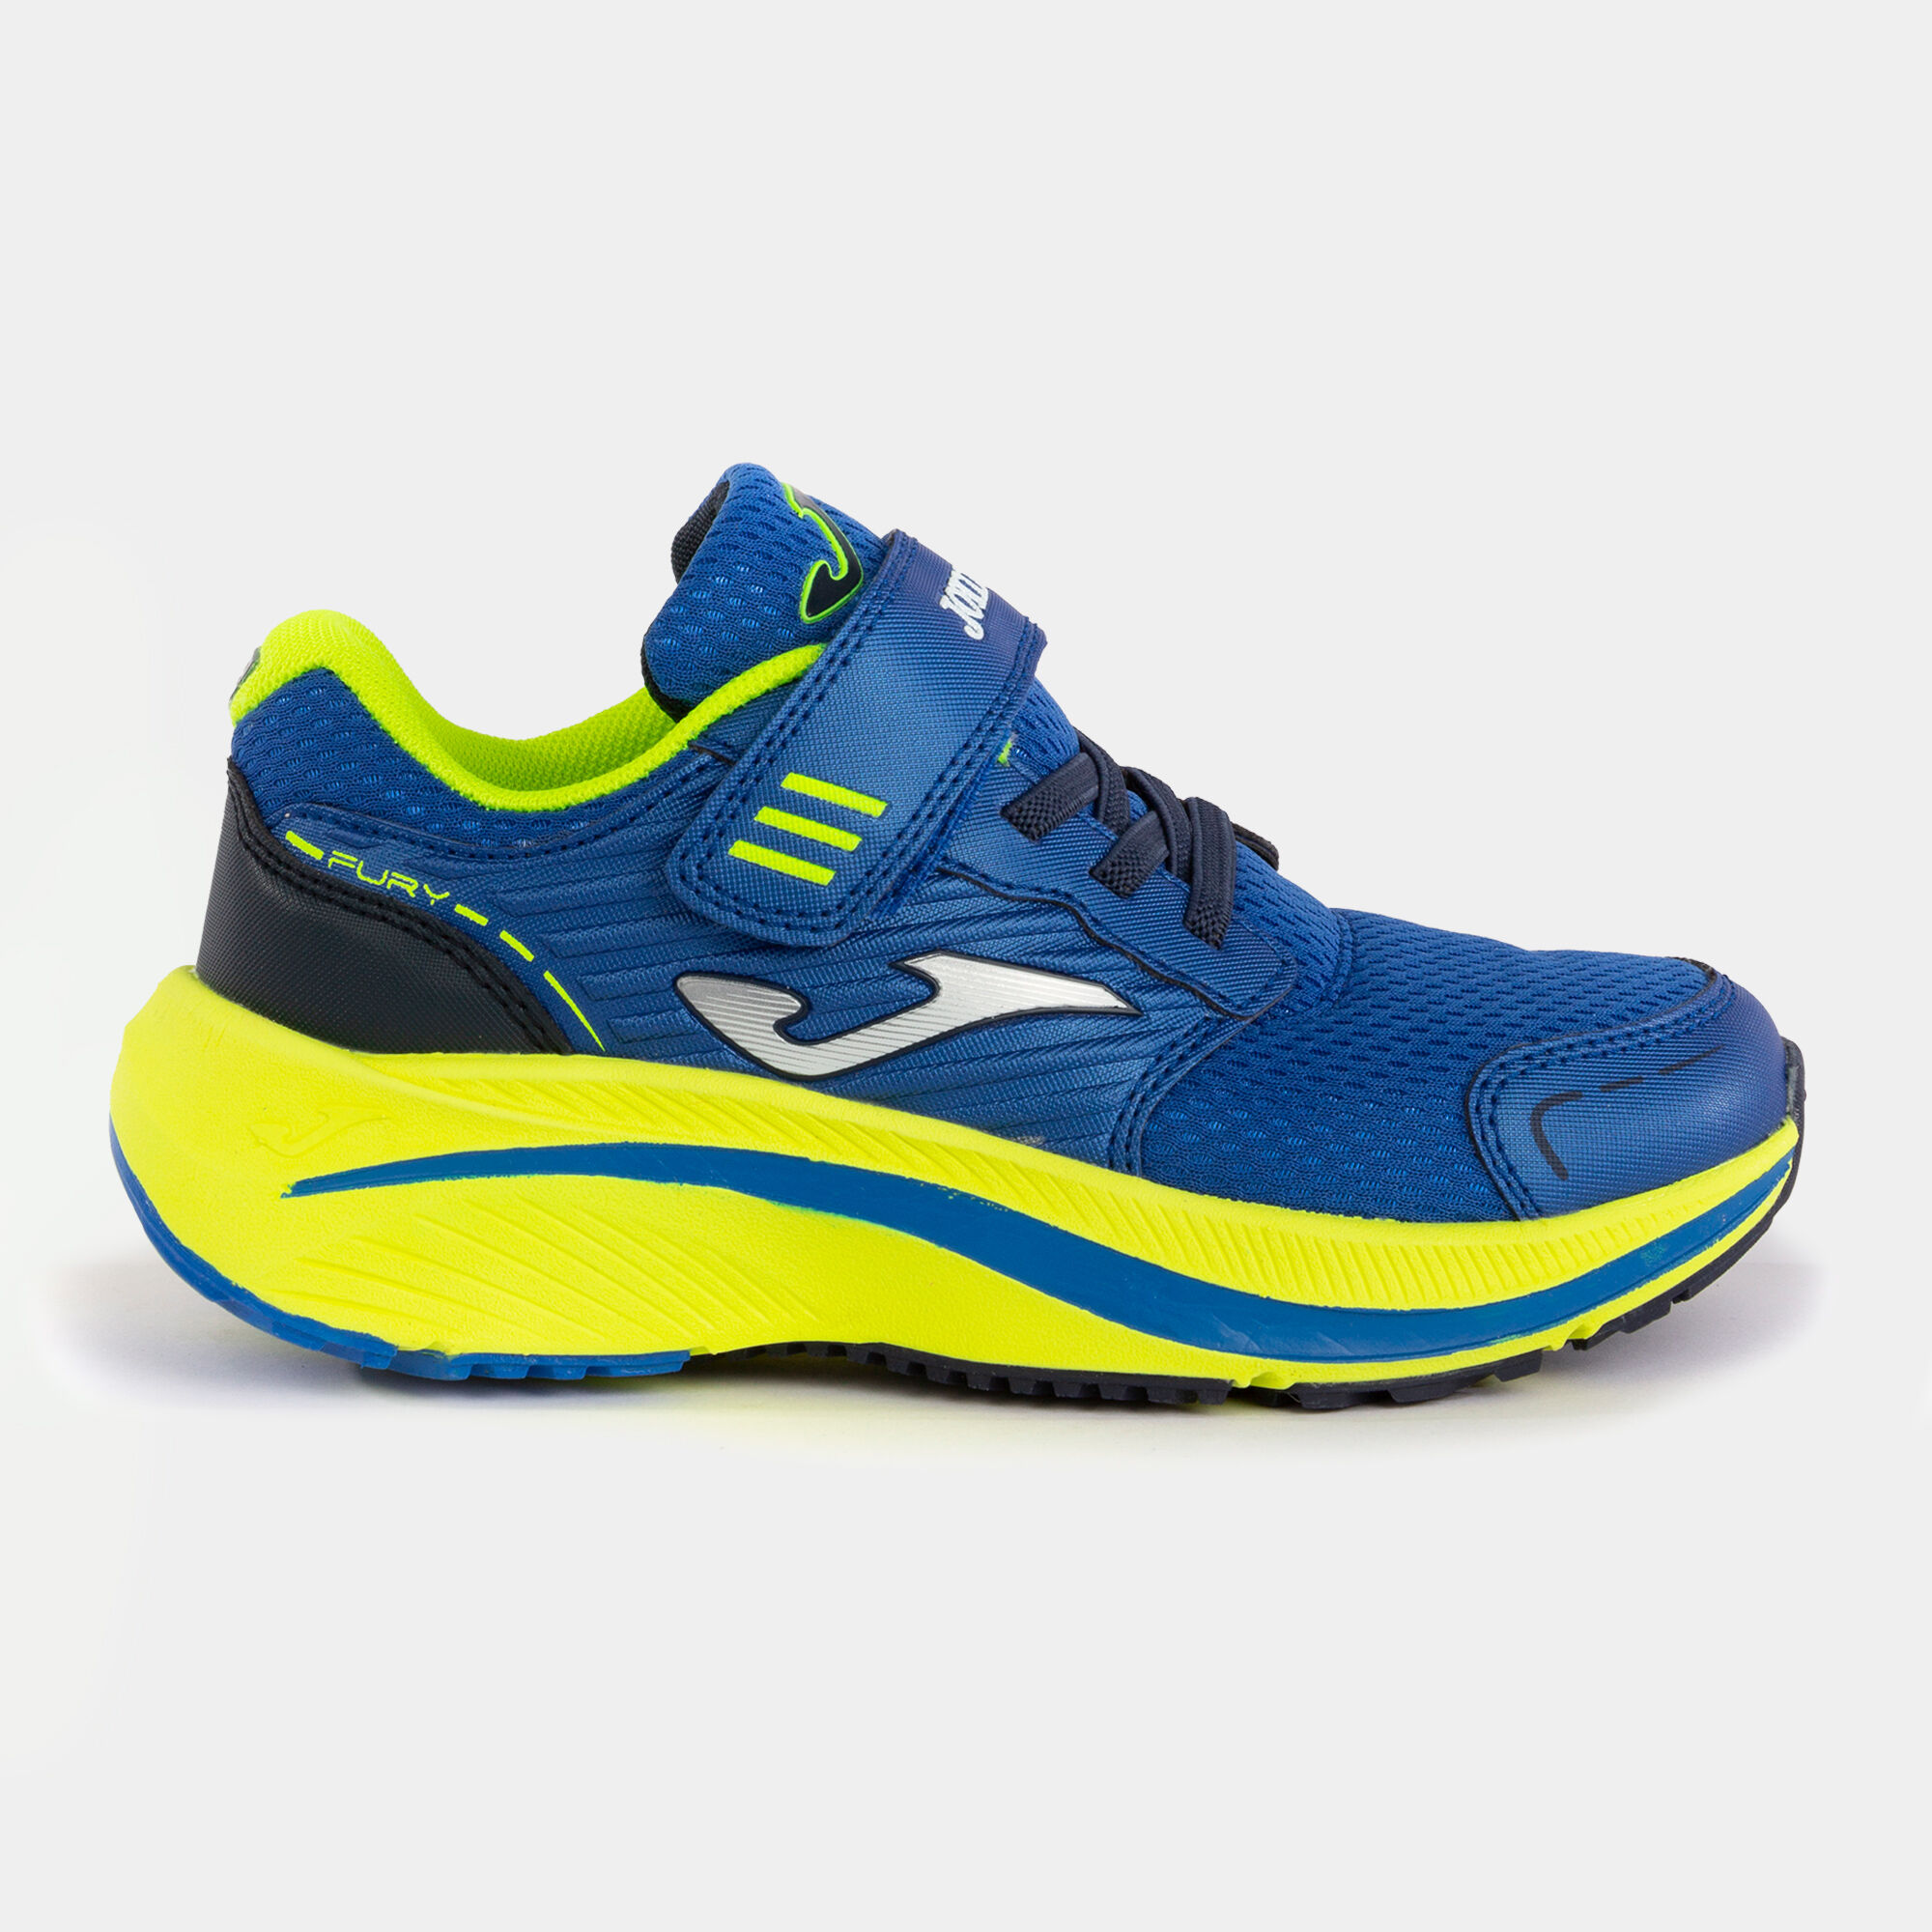 CASUAL SHOES FURY 22 JUNIOR ROYAL BLUE FLUORESCENT GREEN